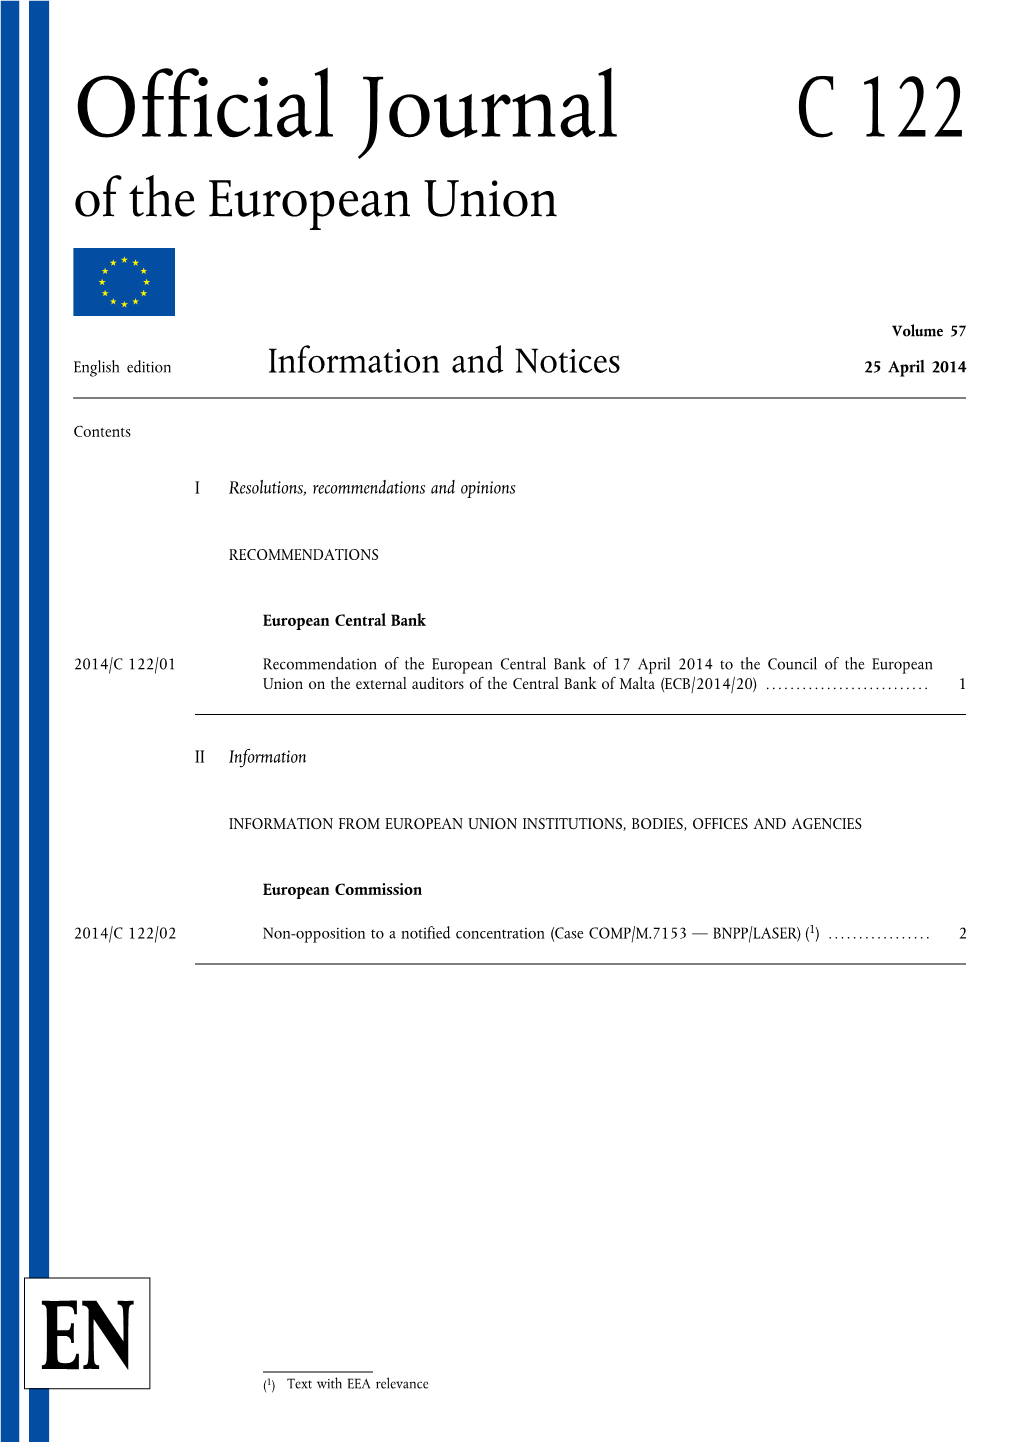 Official Journal C 122 of the European Union